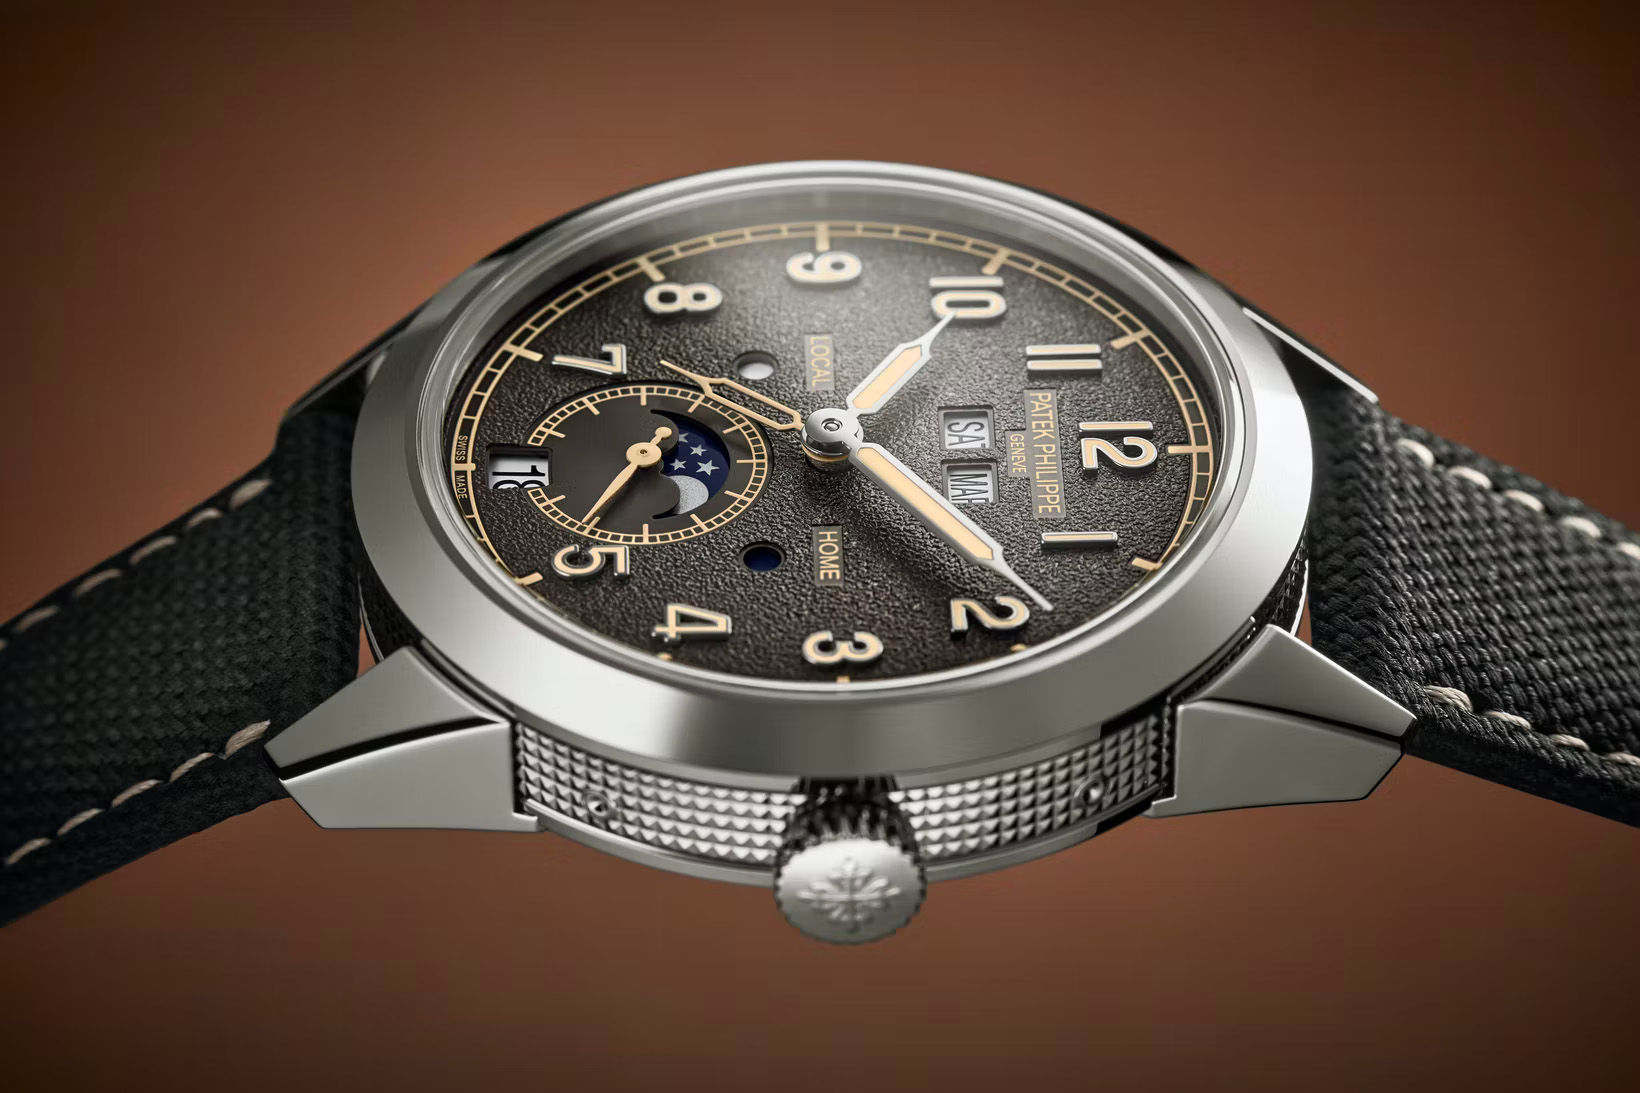 Patek Philippe Further Displays Excellence with Eight Timepiece Debuts